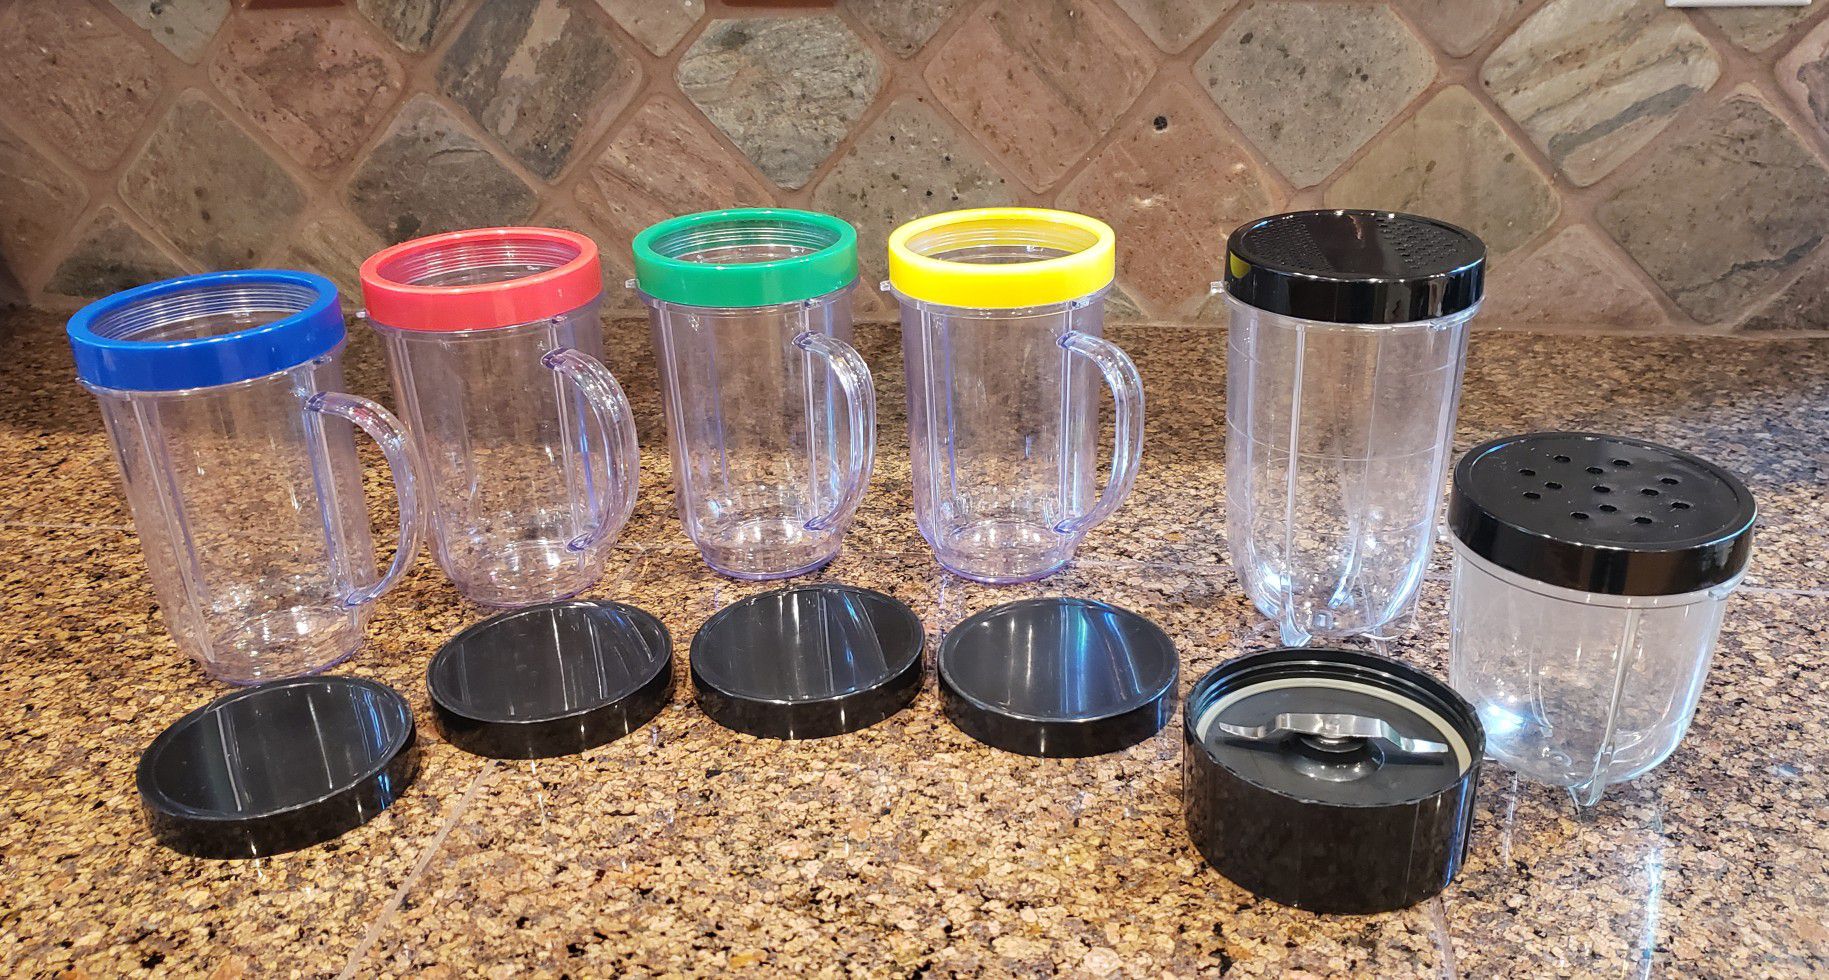 Magic Bullet Cups & Covers - 17 pieces